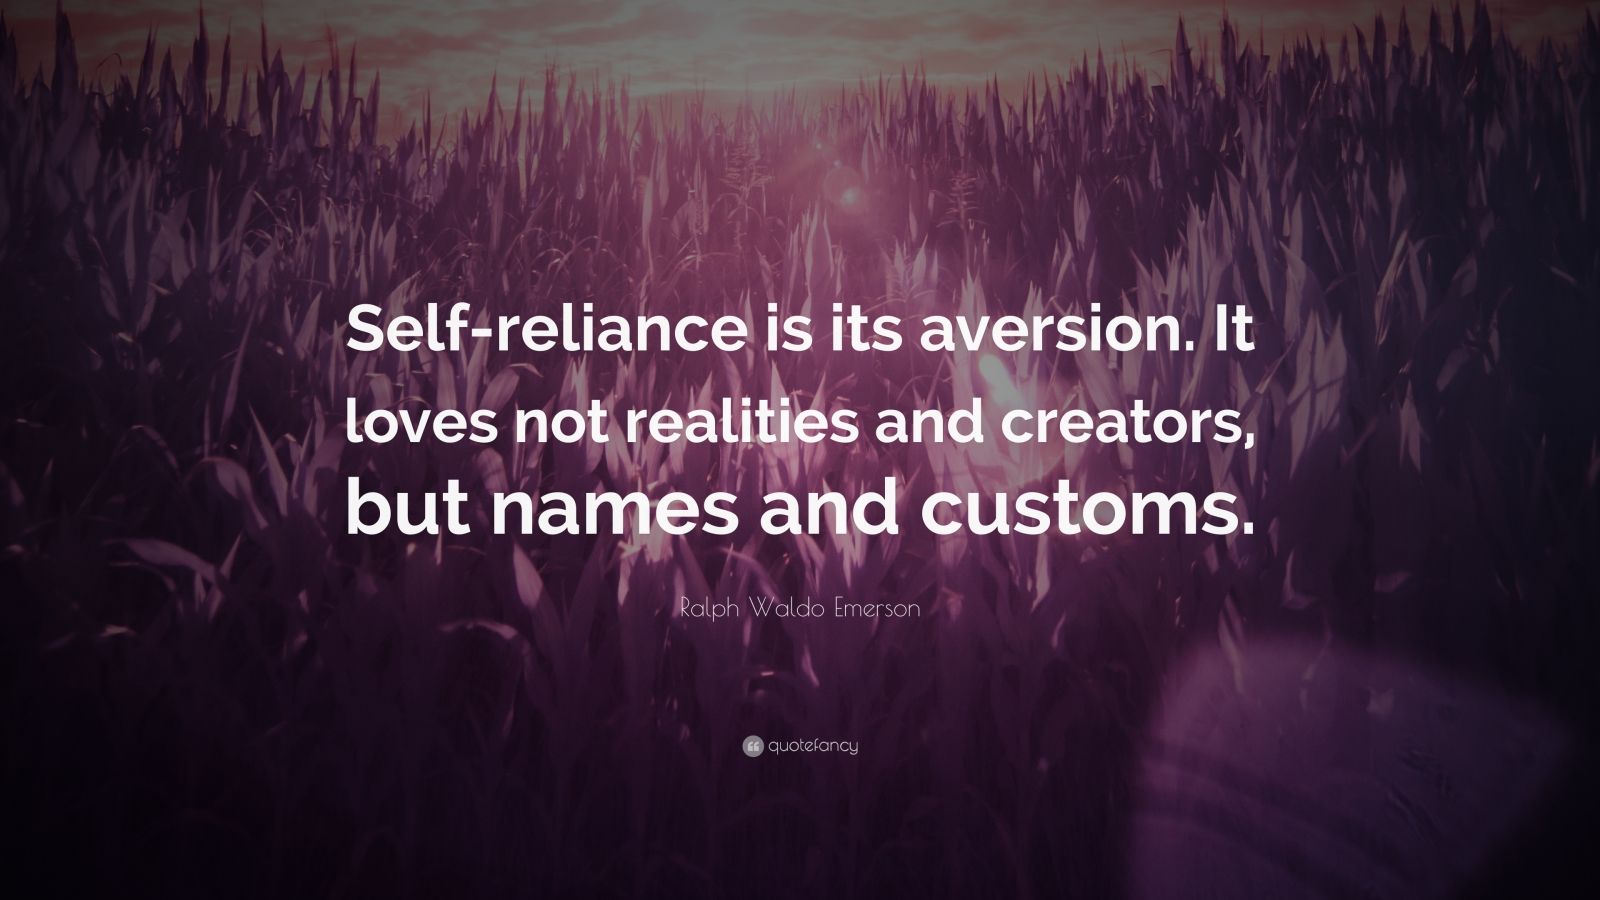 Ralph Waldo Emerson Quote: “Self-reliance is its aversion. It loves not